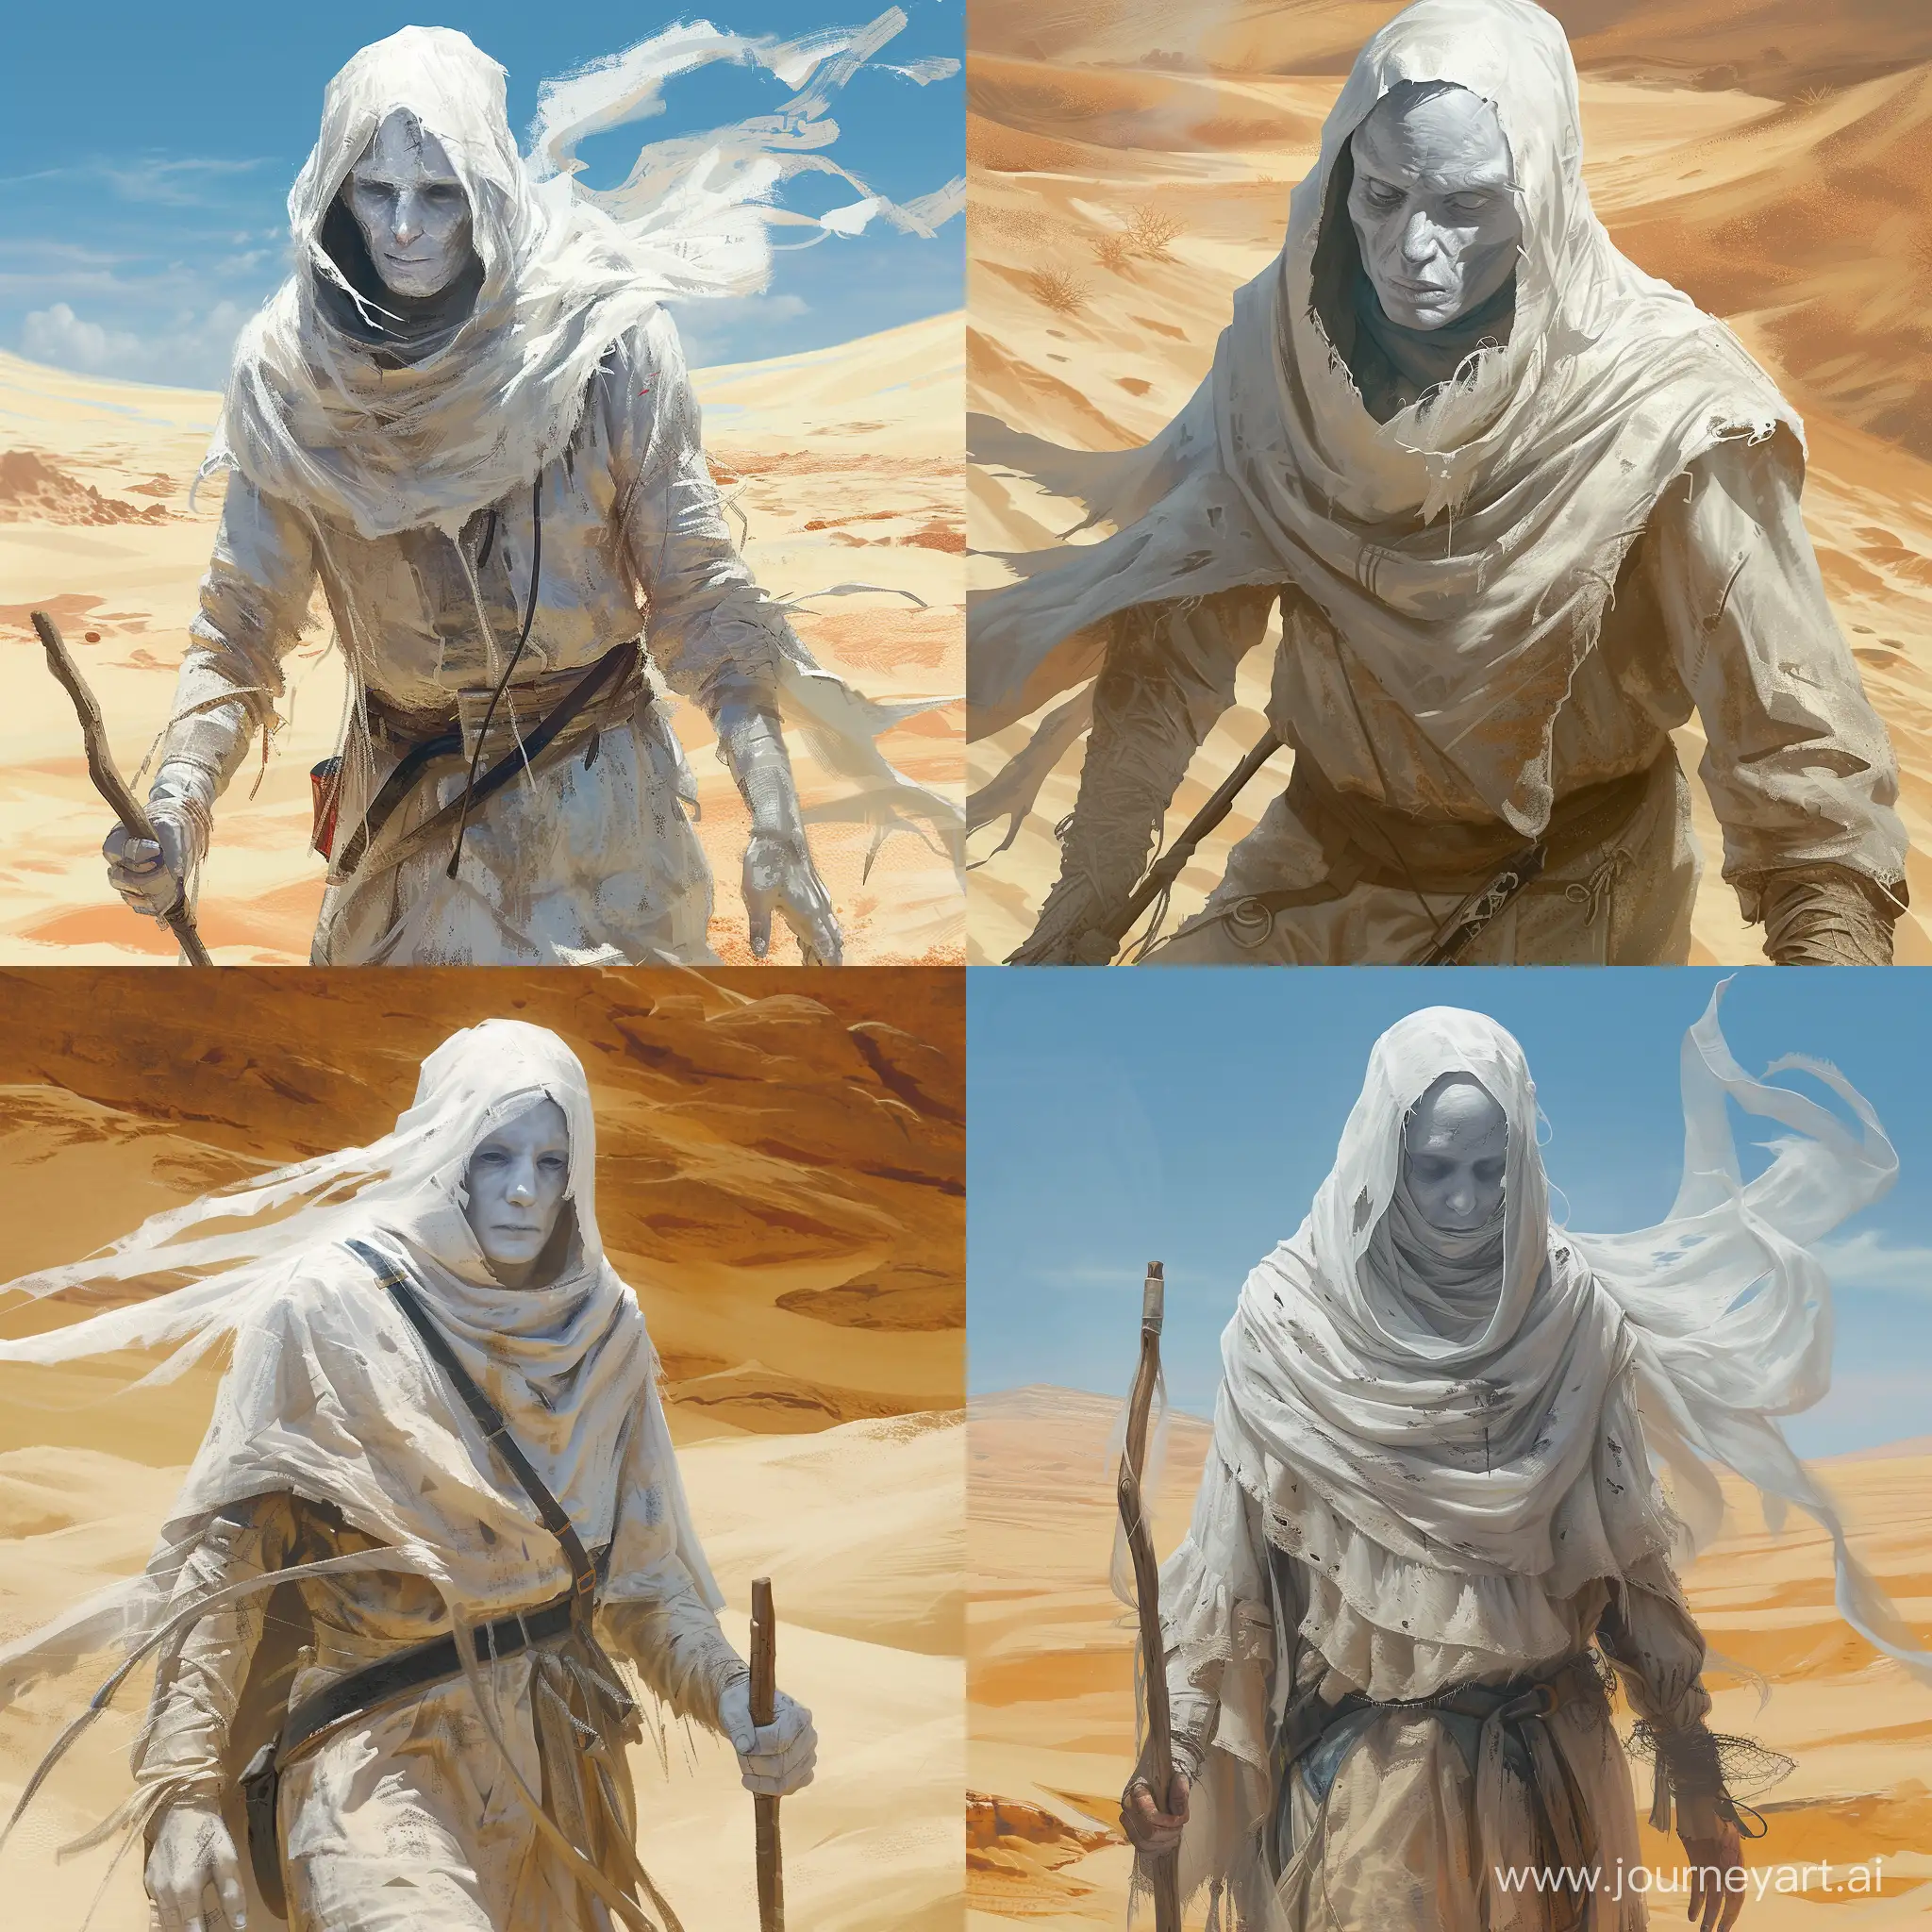 Draw a character from the Dungeons and Dragons universe according to the following description: He is a  male changeling dressed in old dusty travelling clothes of white color. His head with silver hair is covered with a white hood, his ghostly white face is clean shaven with a kind faint smile, his eyes are blank white. He is making his way through the desert with a walking stick in his hand.